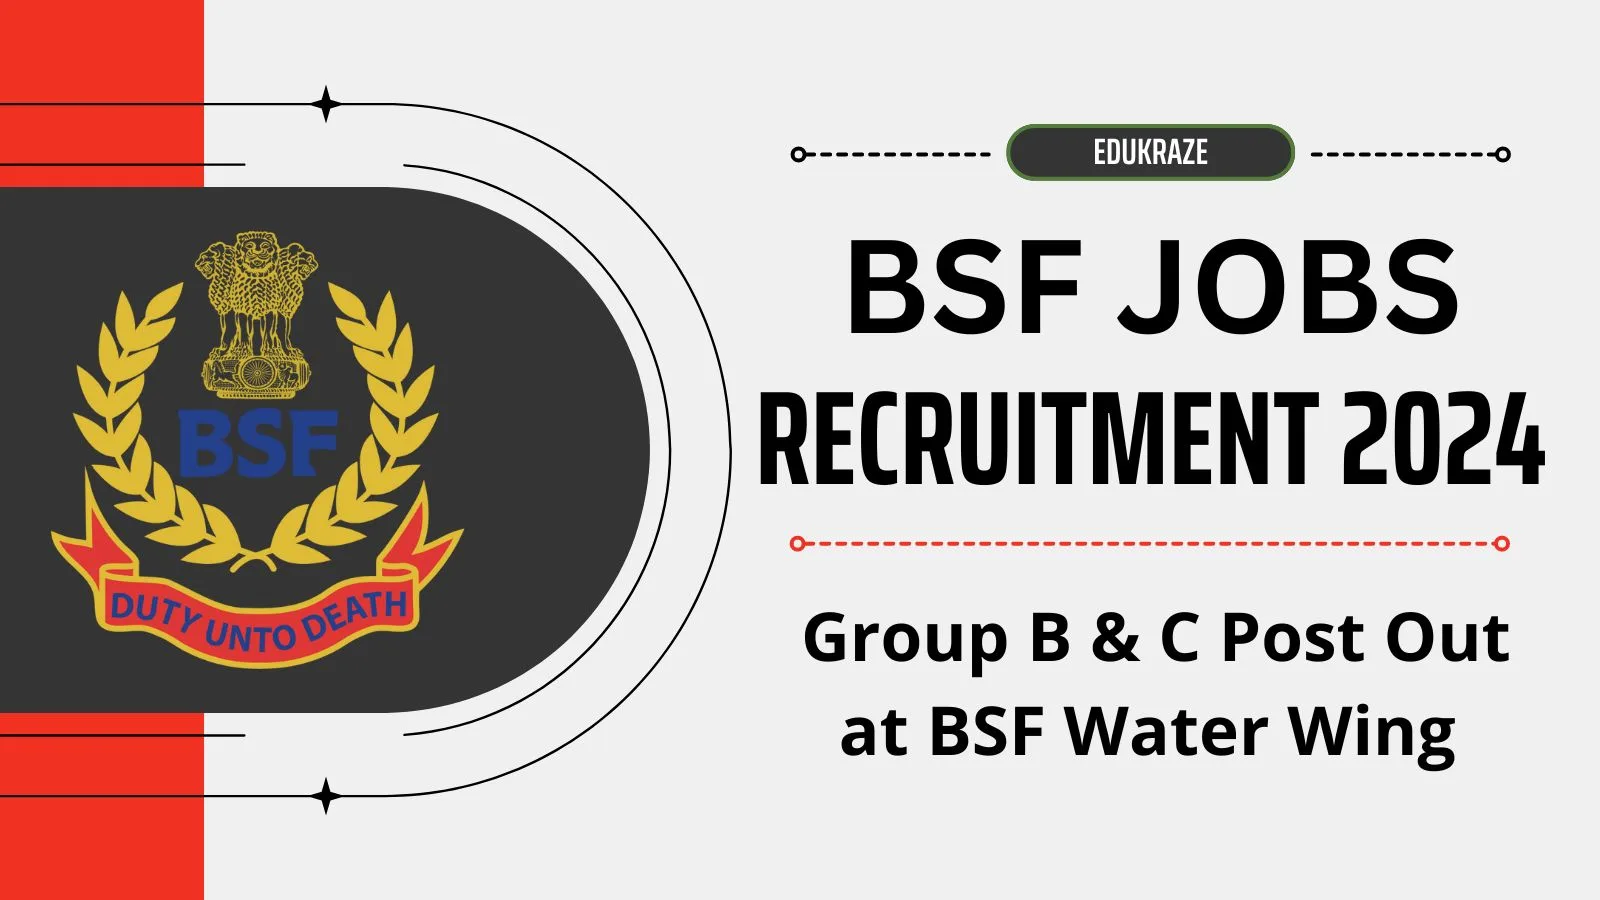 Group B & C Posts Out at BSF Water Wing Recruitment 2024